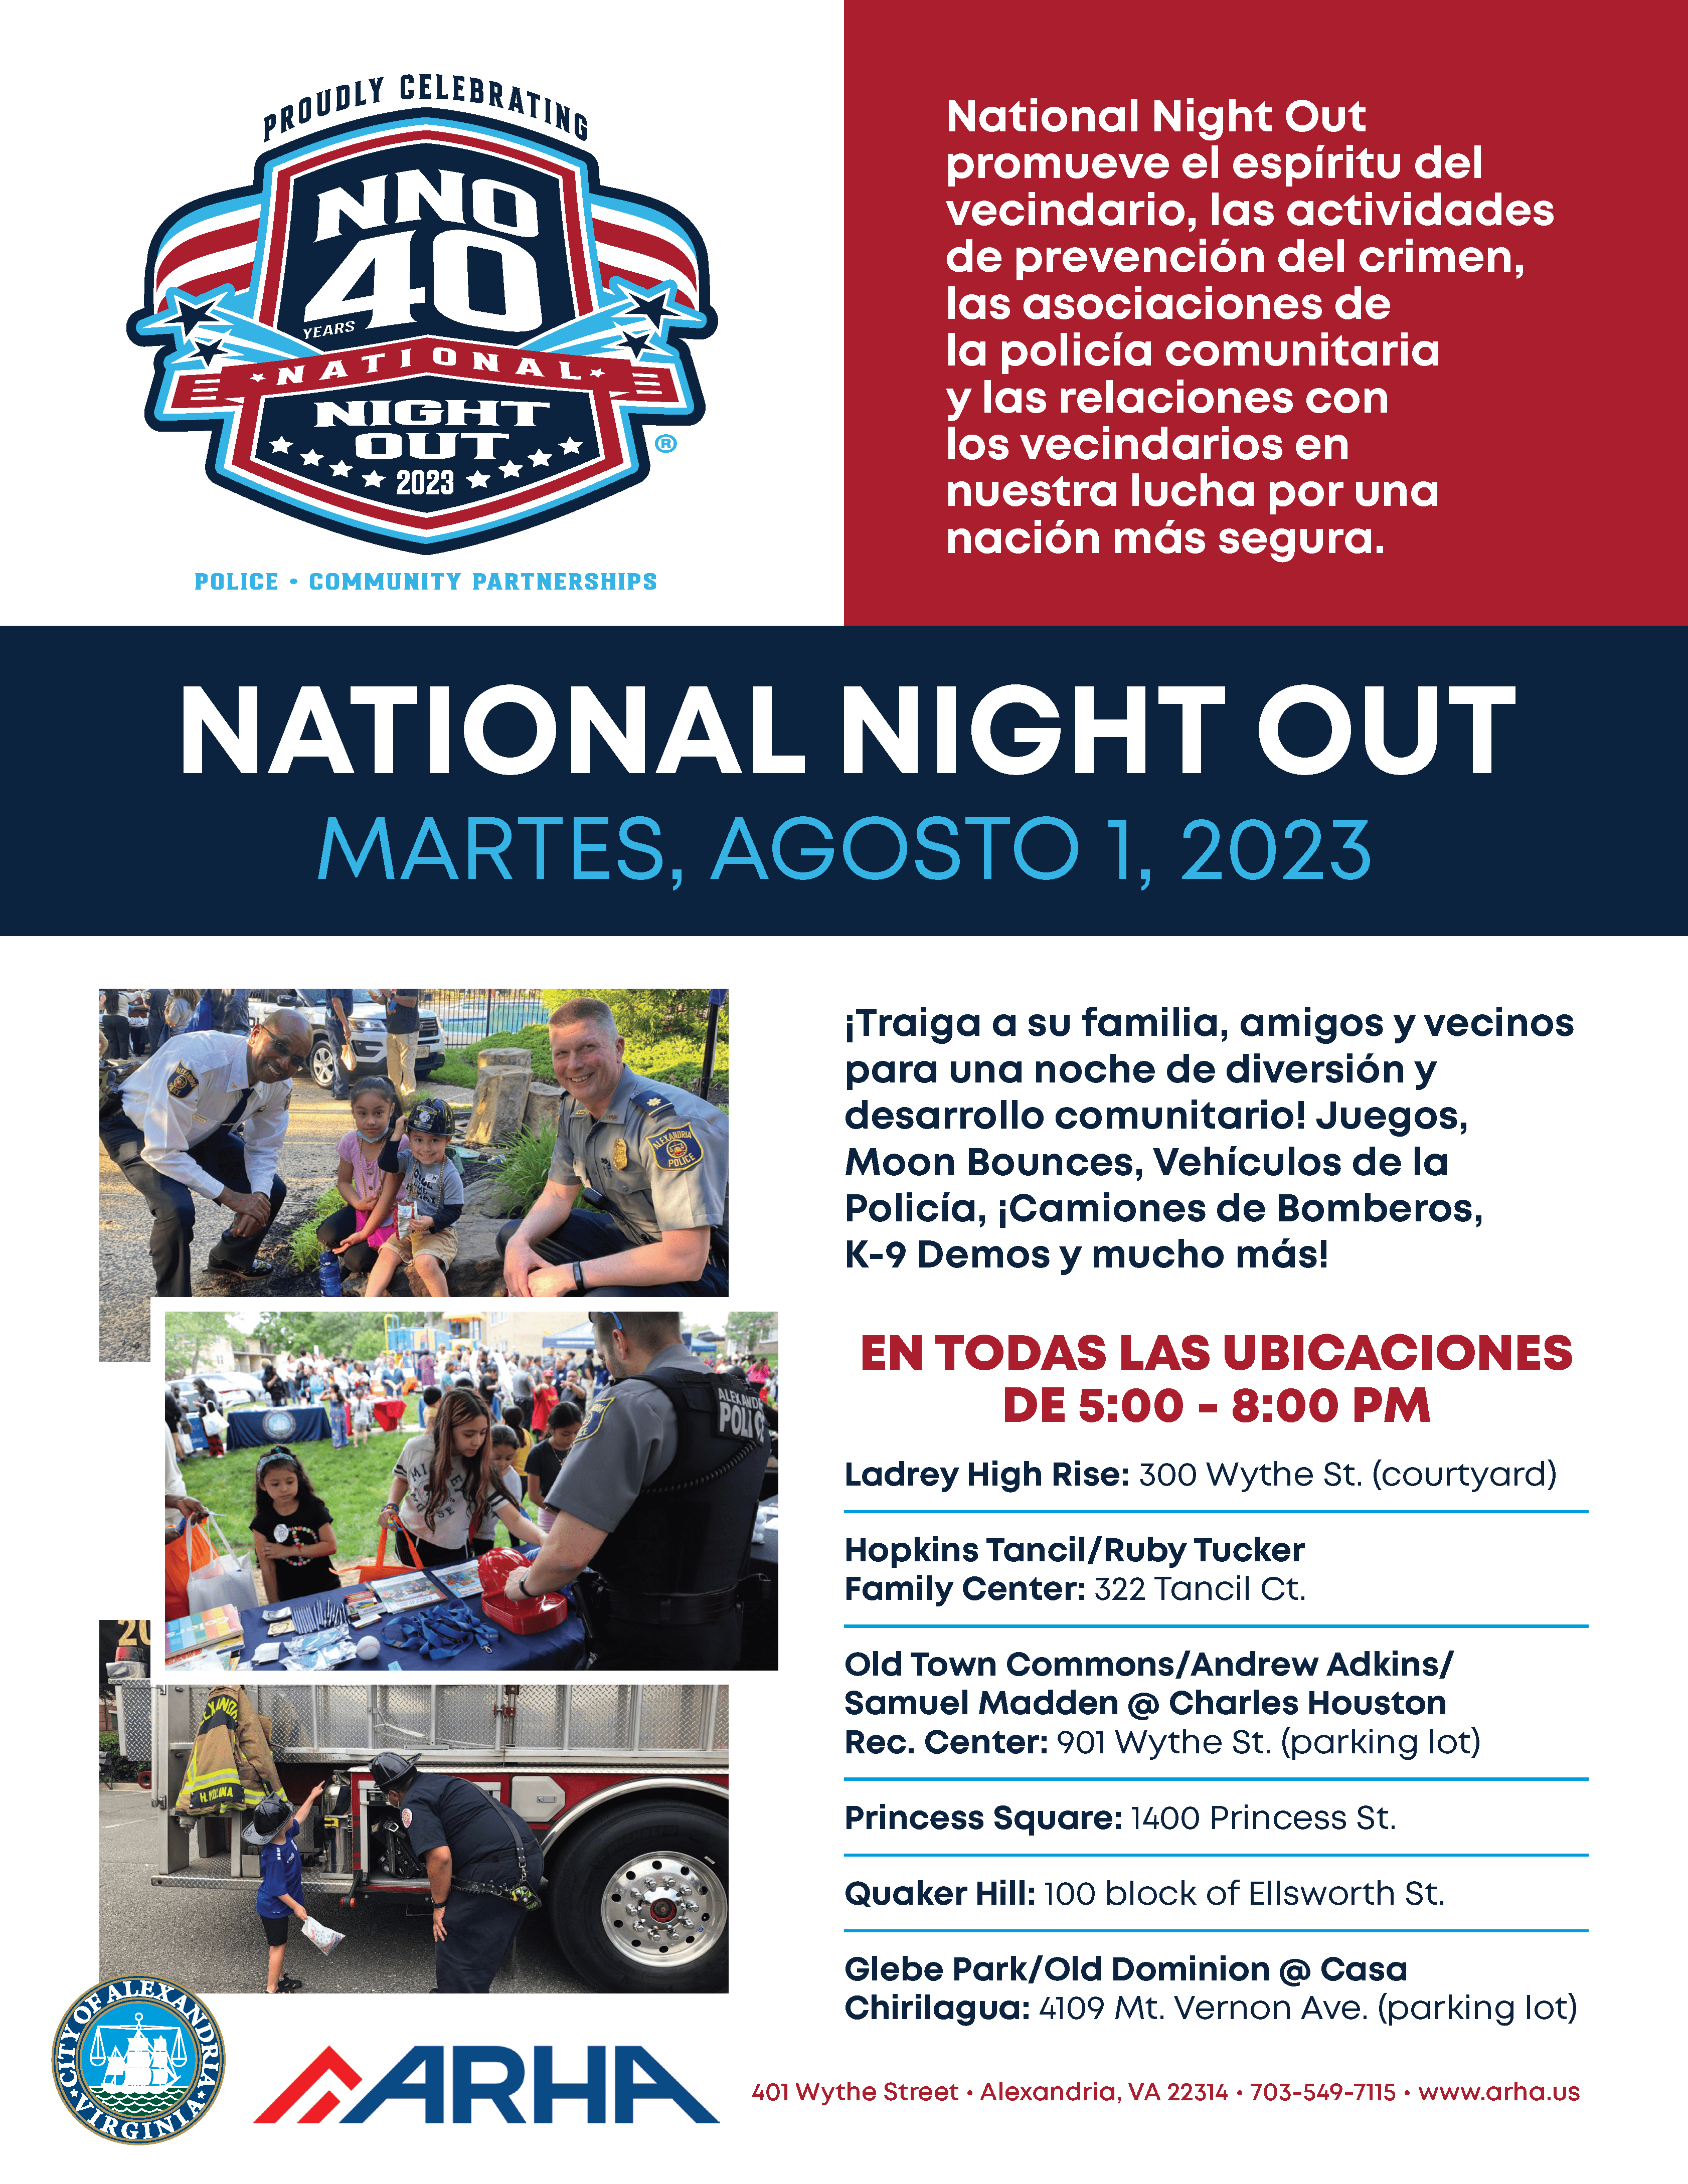 national night out flyer in spanish